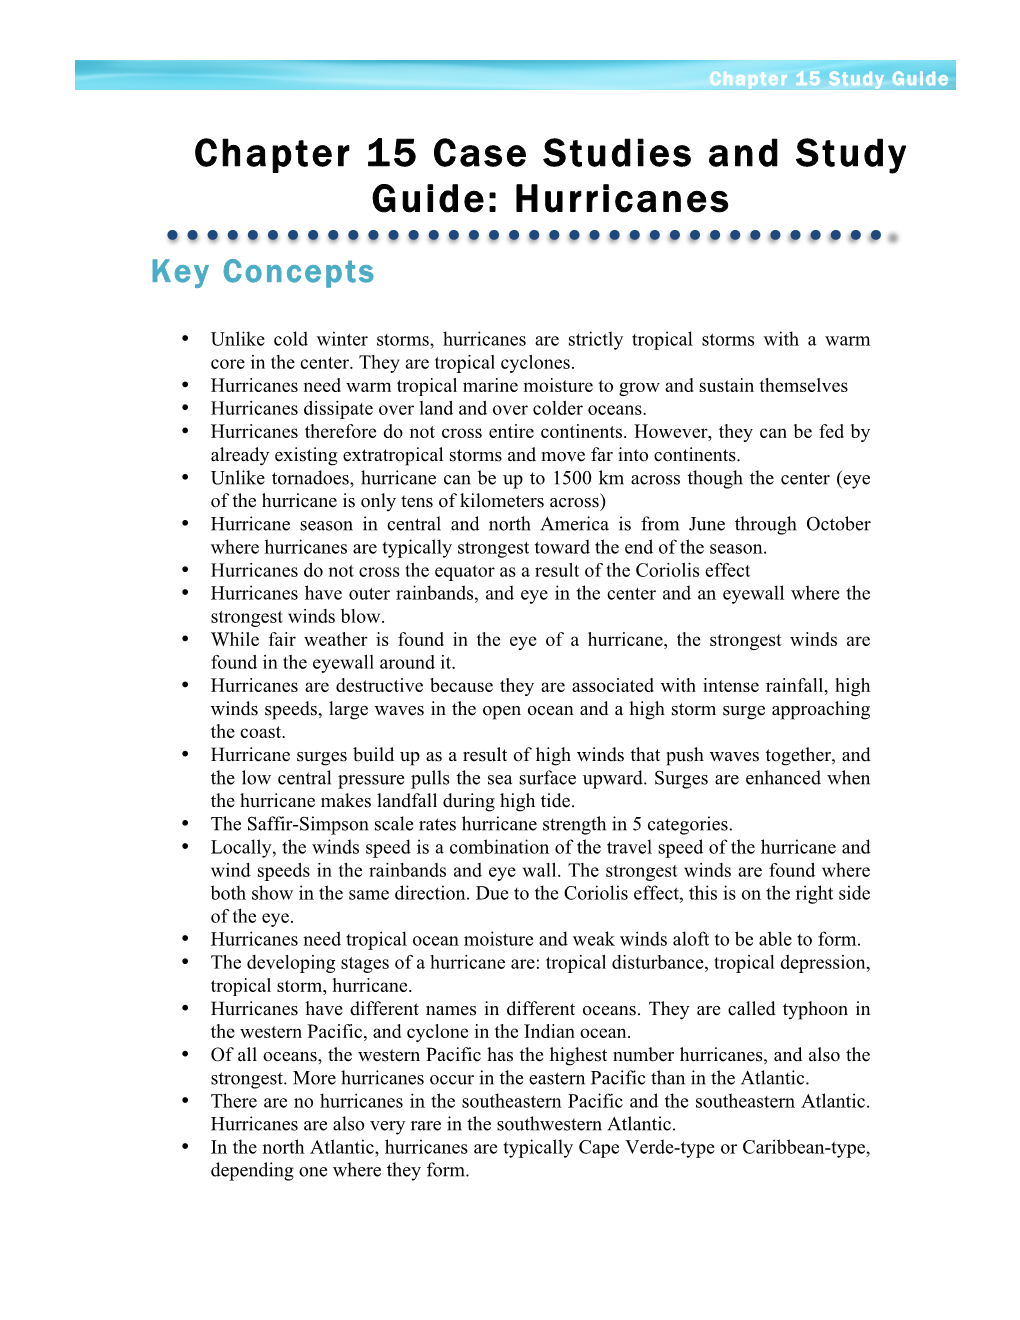 Chapter 15 Case Studies and Study Guide: Hurricanes